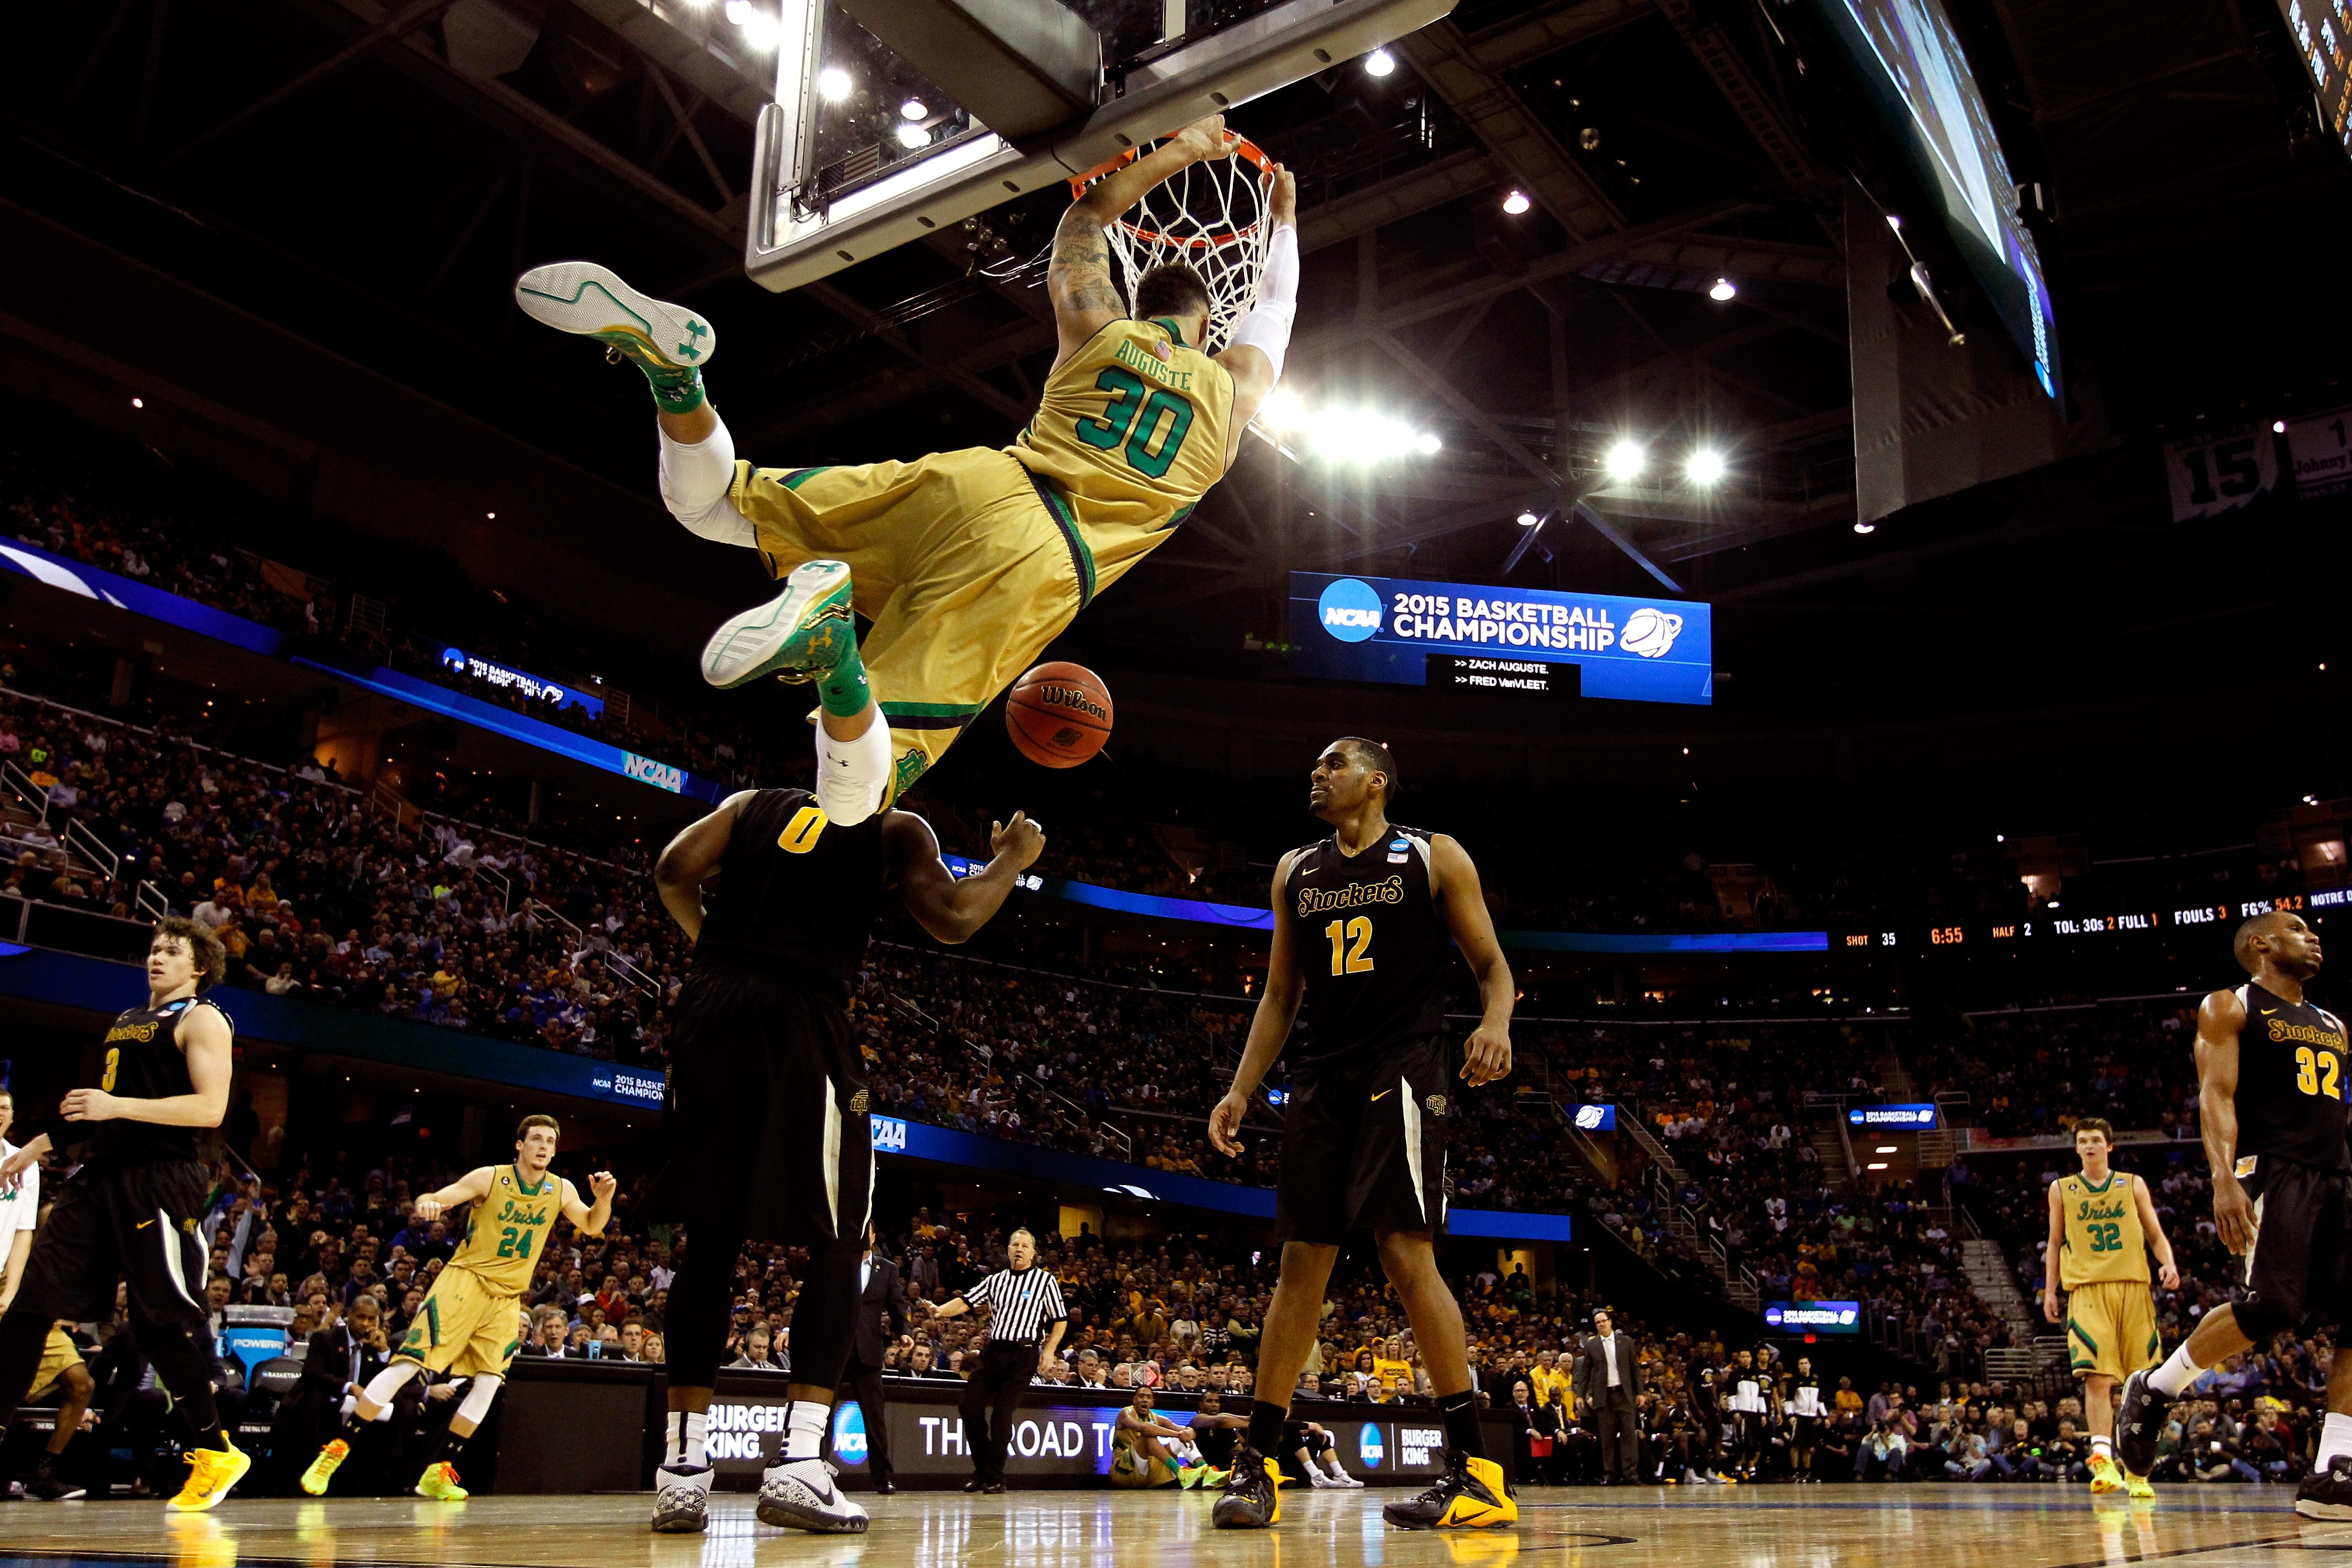 Zach Auguste #30 of the Notre Dame Fighting Irish dunks in the second half against Rashard Kelly #0 and Darius Carter #12 of the Wichita State Shockers during the Midwest Regional semifinal of the 2015 NCAA Men's Basketball Tournament at Quicken Loans Arena on March 26, 2015 in Cleveland, Ohio.